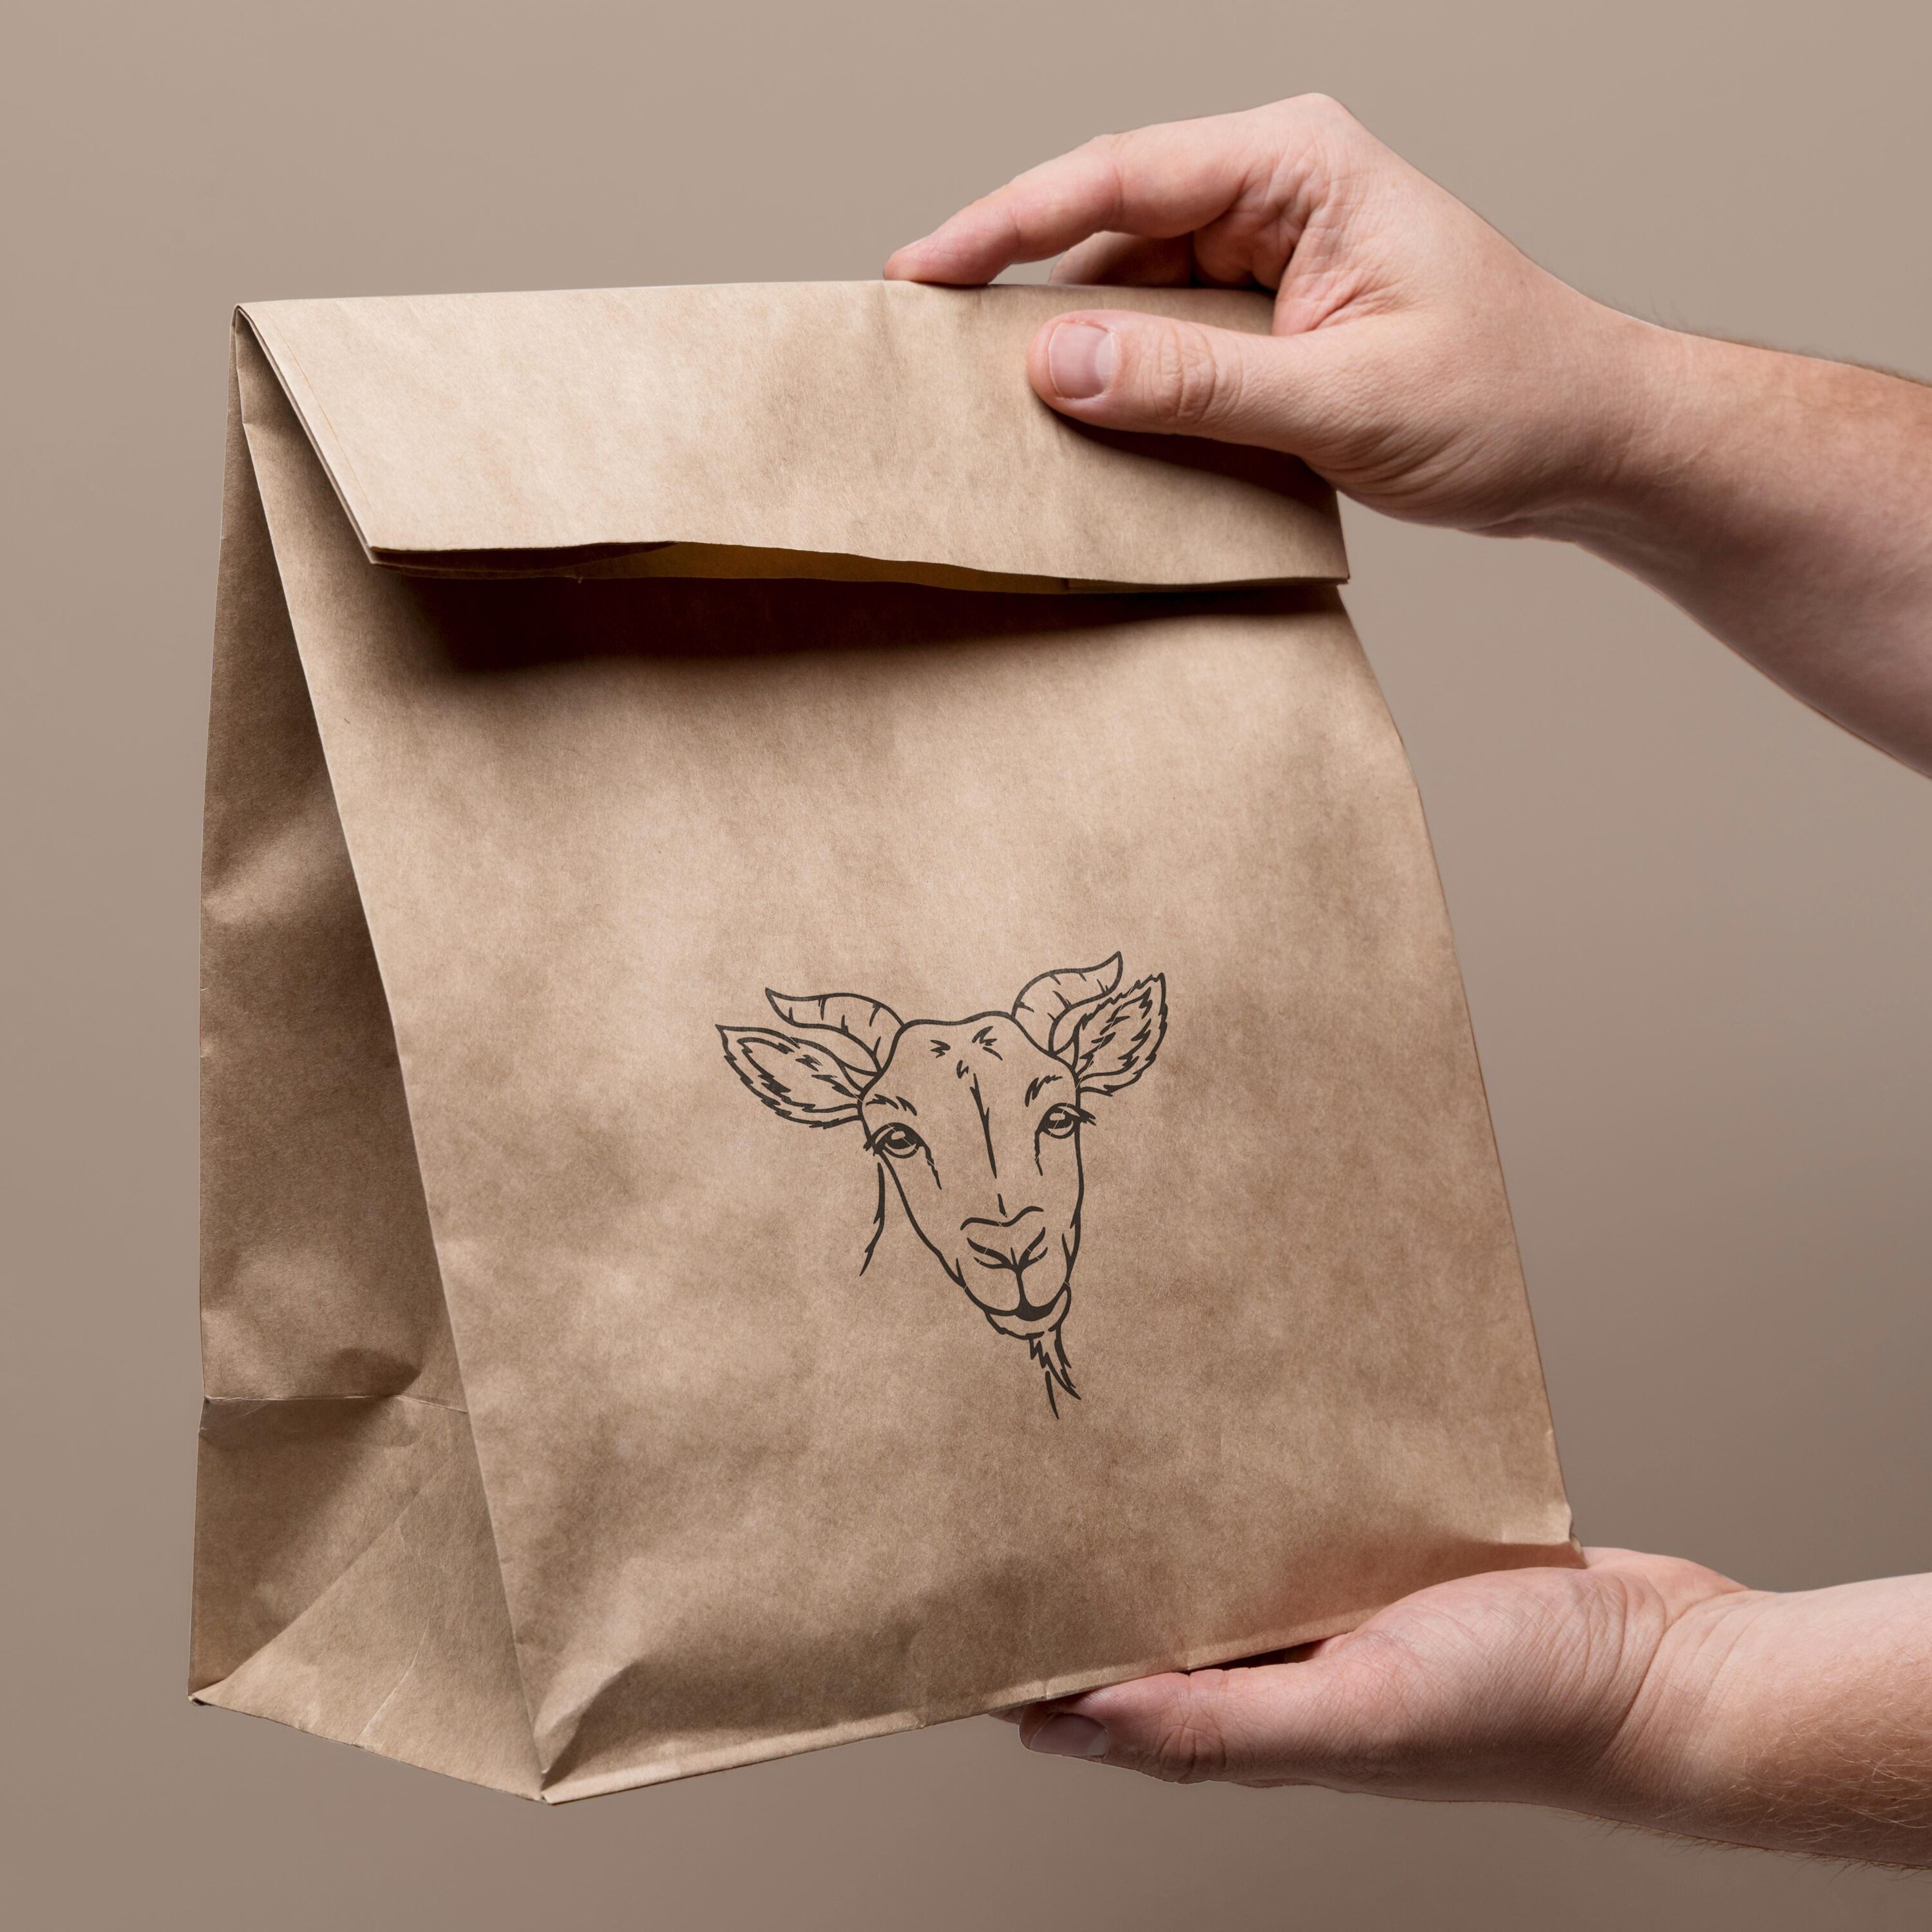 Hand holding a brown paper bag with a drawing of a deer on it.